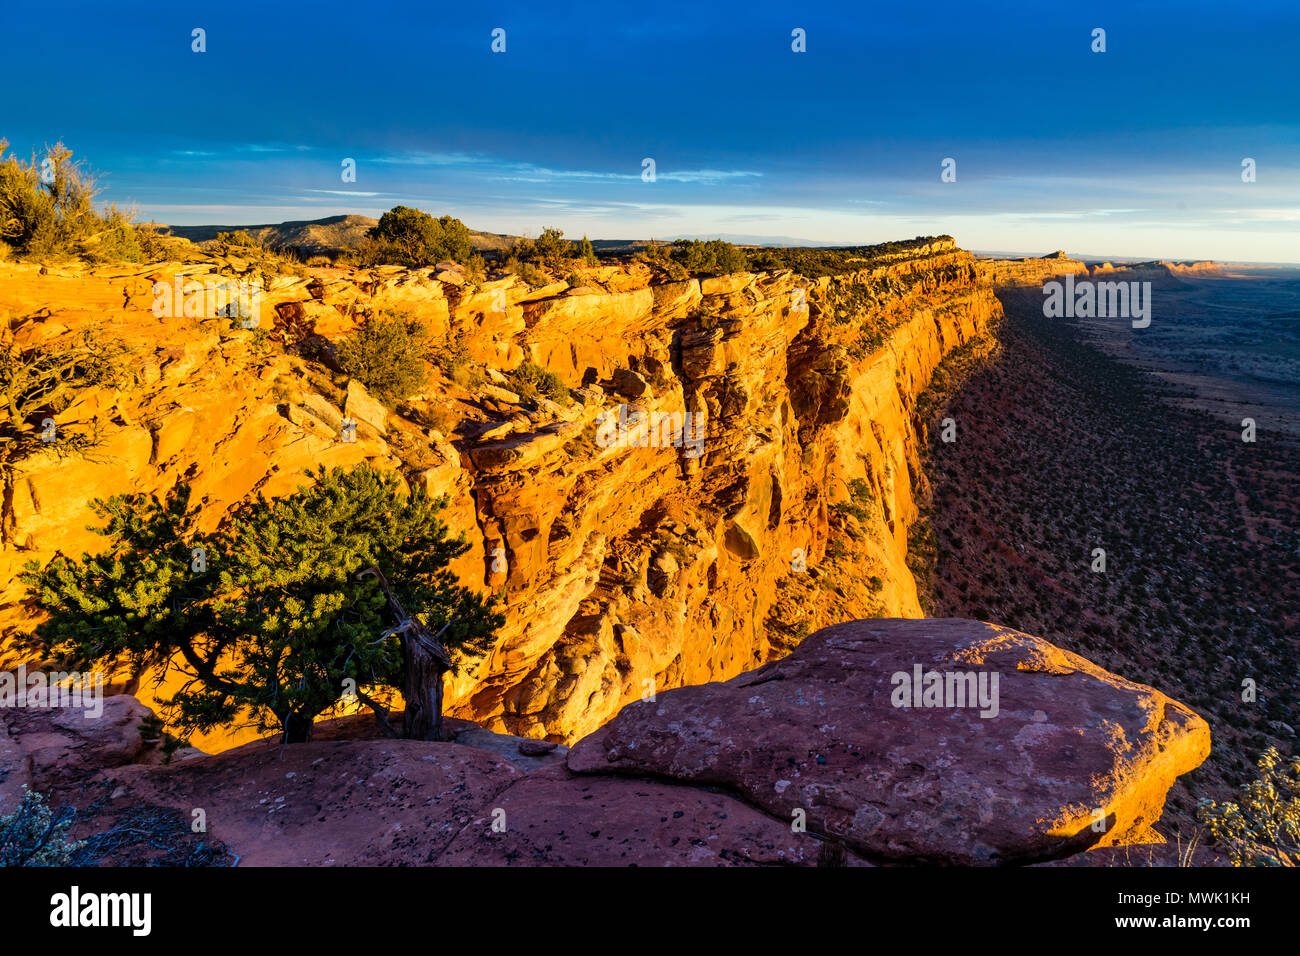 View south along Comb Ridge cliff from top in sunset light, Comb Wash below, north of Highway 95 west of Blanding, Utah and north of Bluff, Utah USA Stock Photo